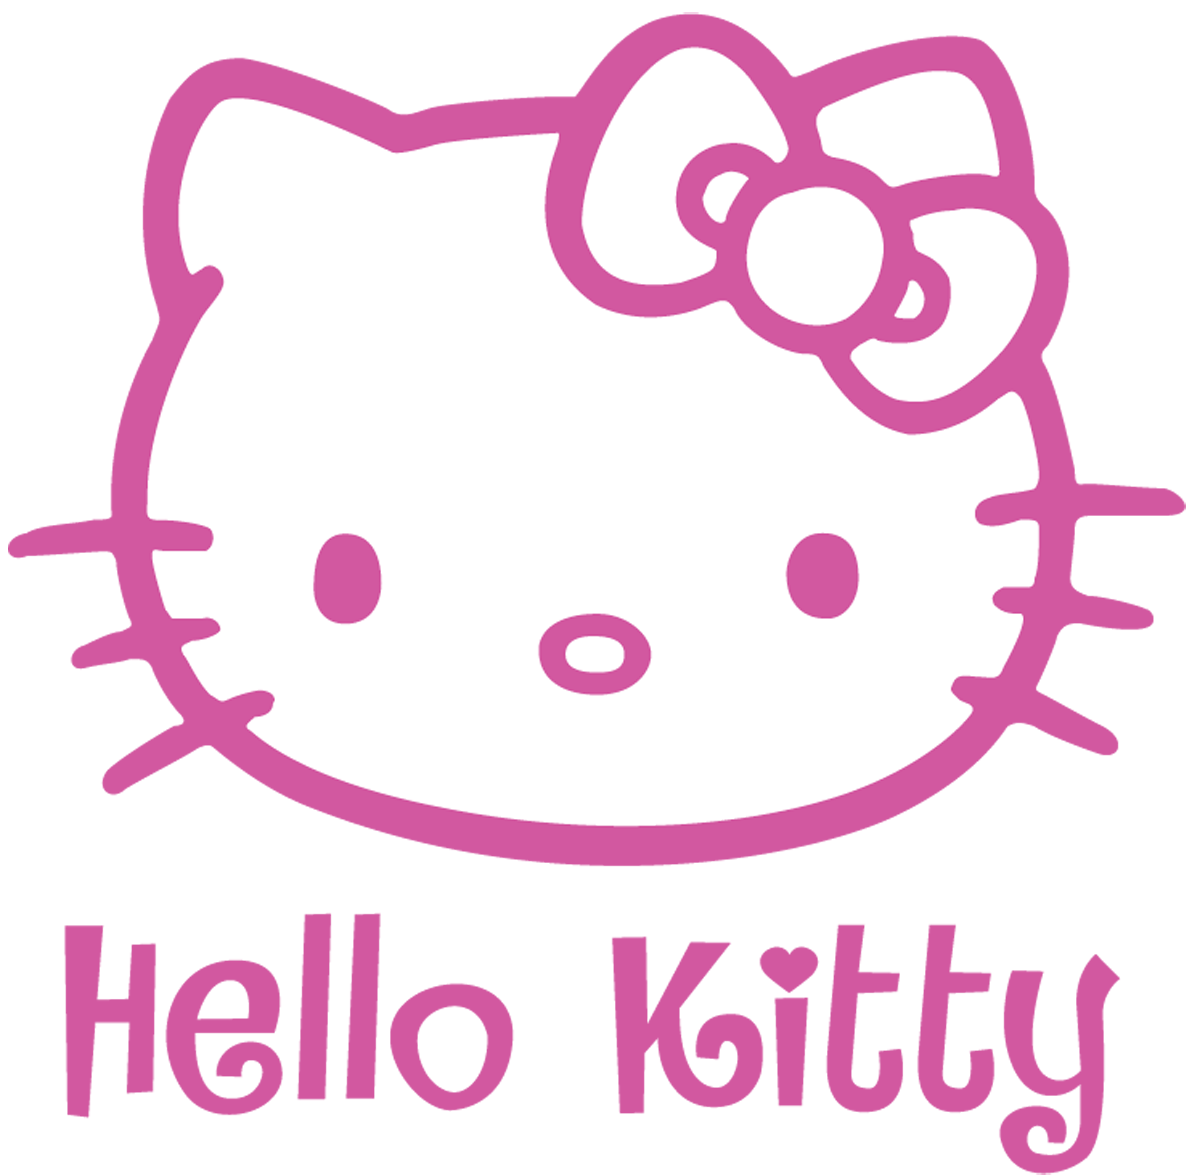 Hello Kitty HD Wallpaper for iPhone 6